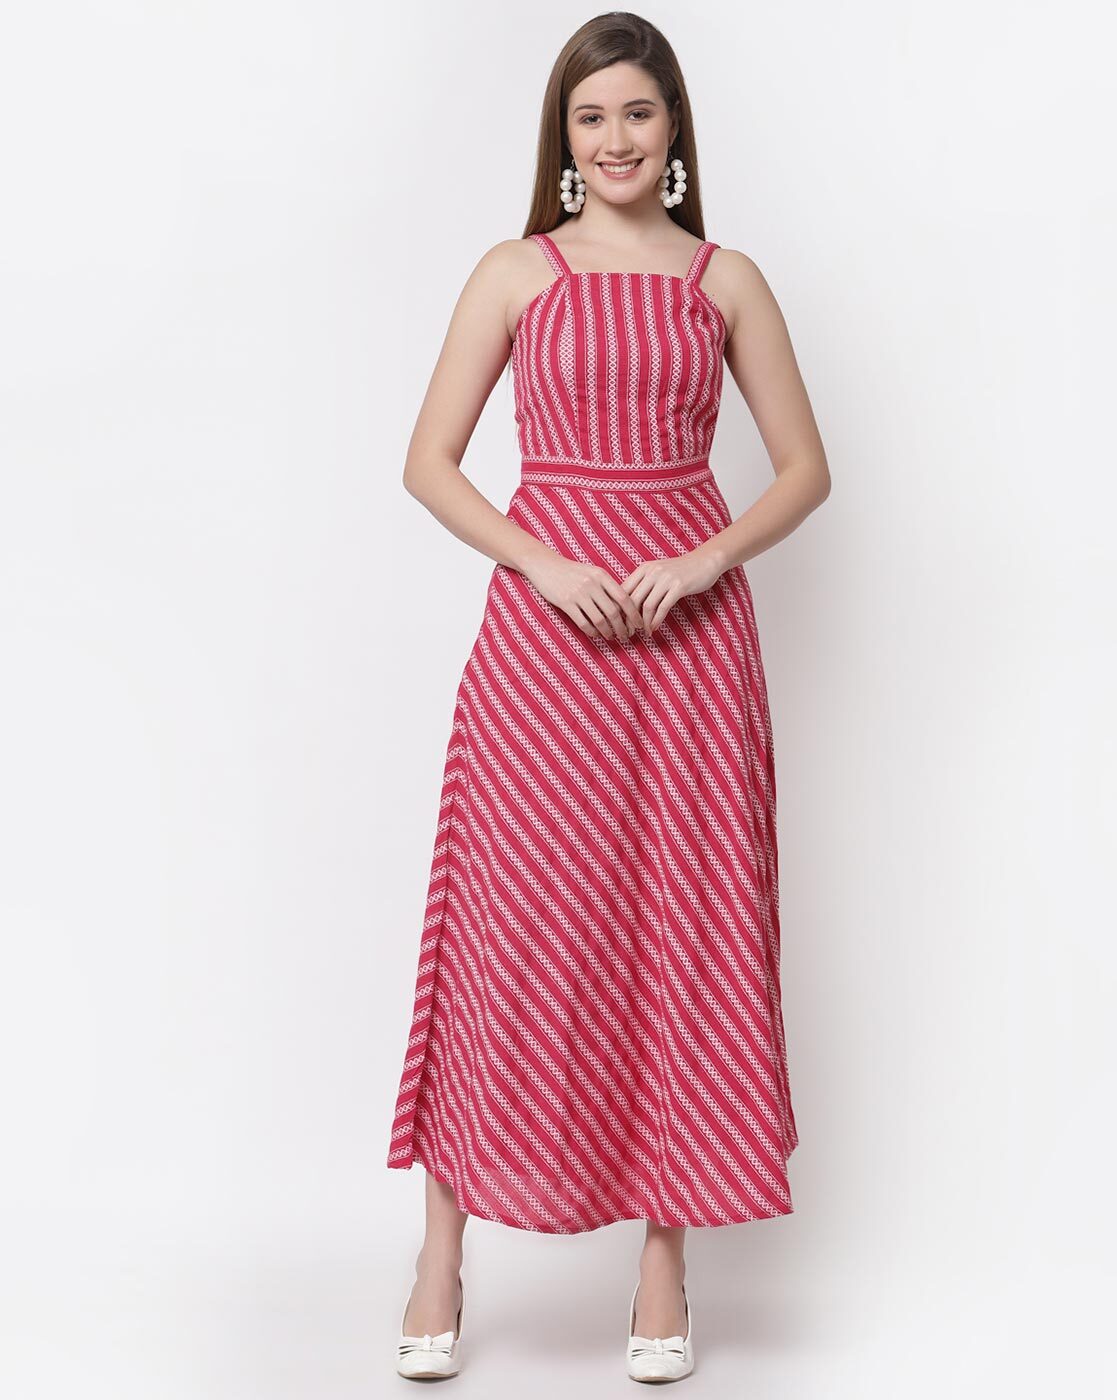 Buy Off White Dresses & Gowns for Women by AZIRA Online | Ajio.com